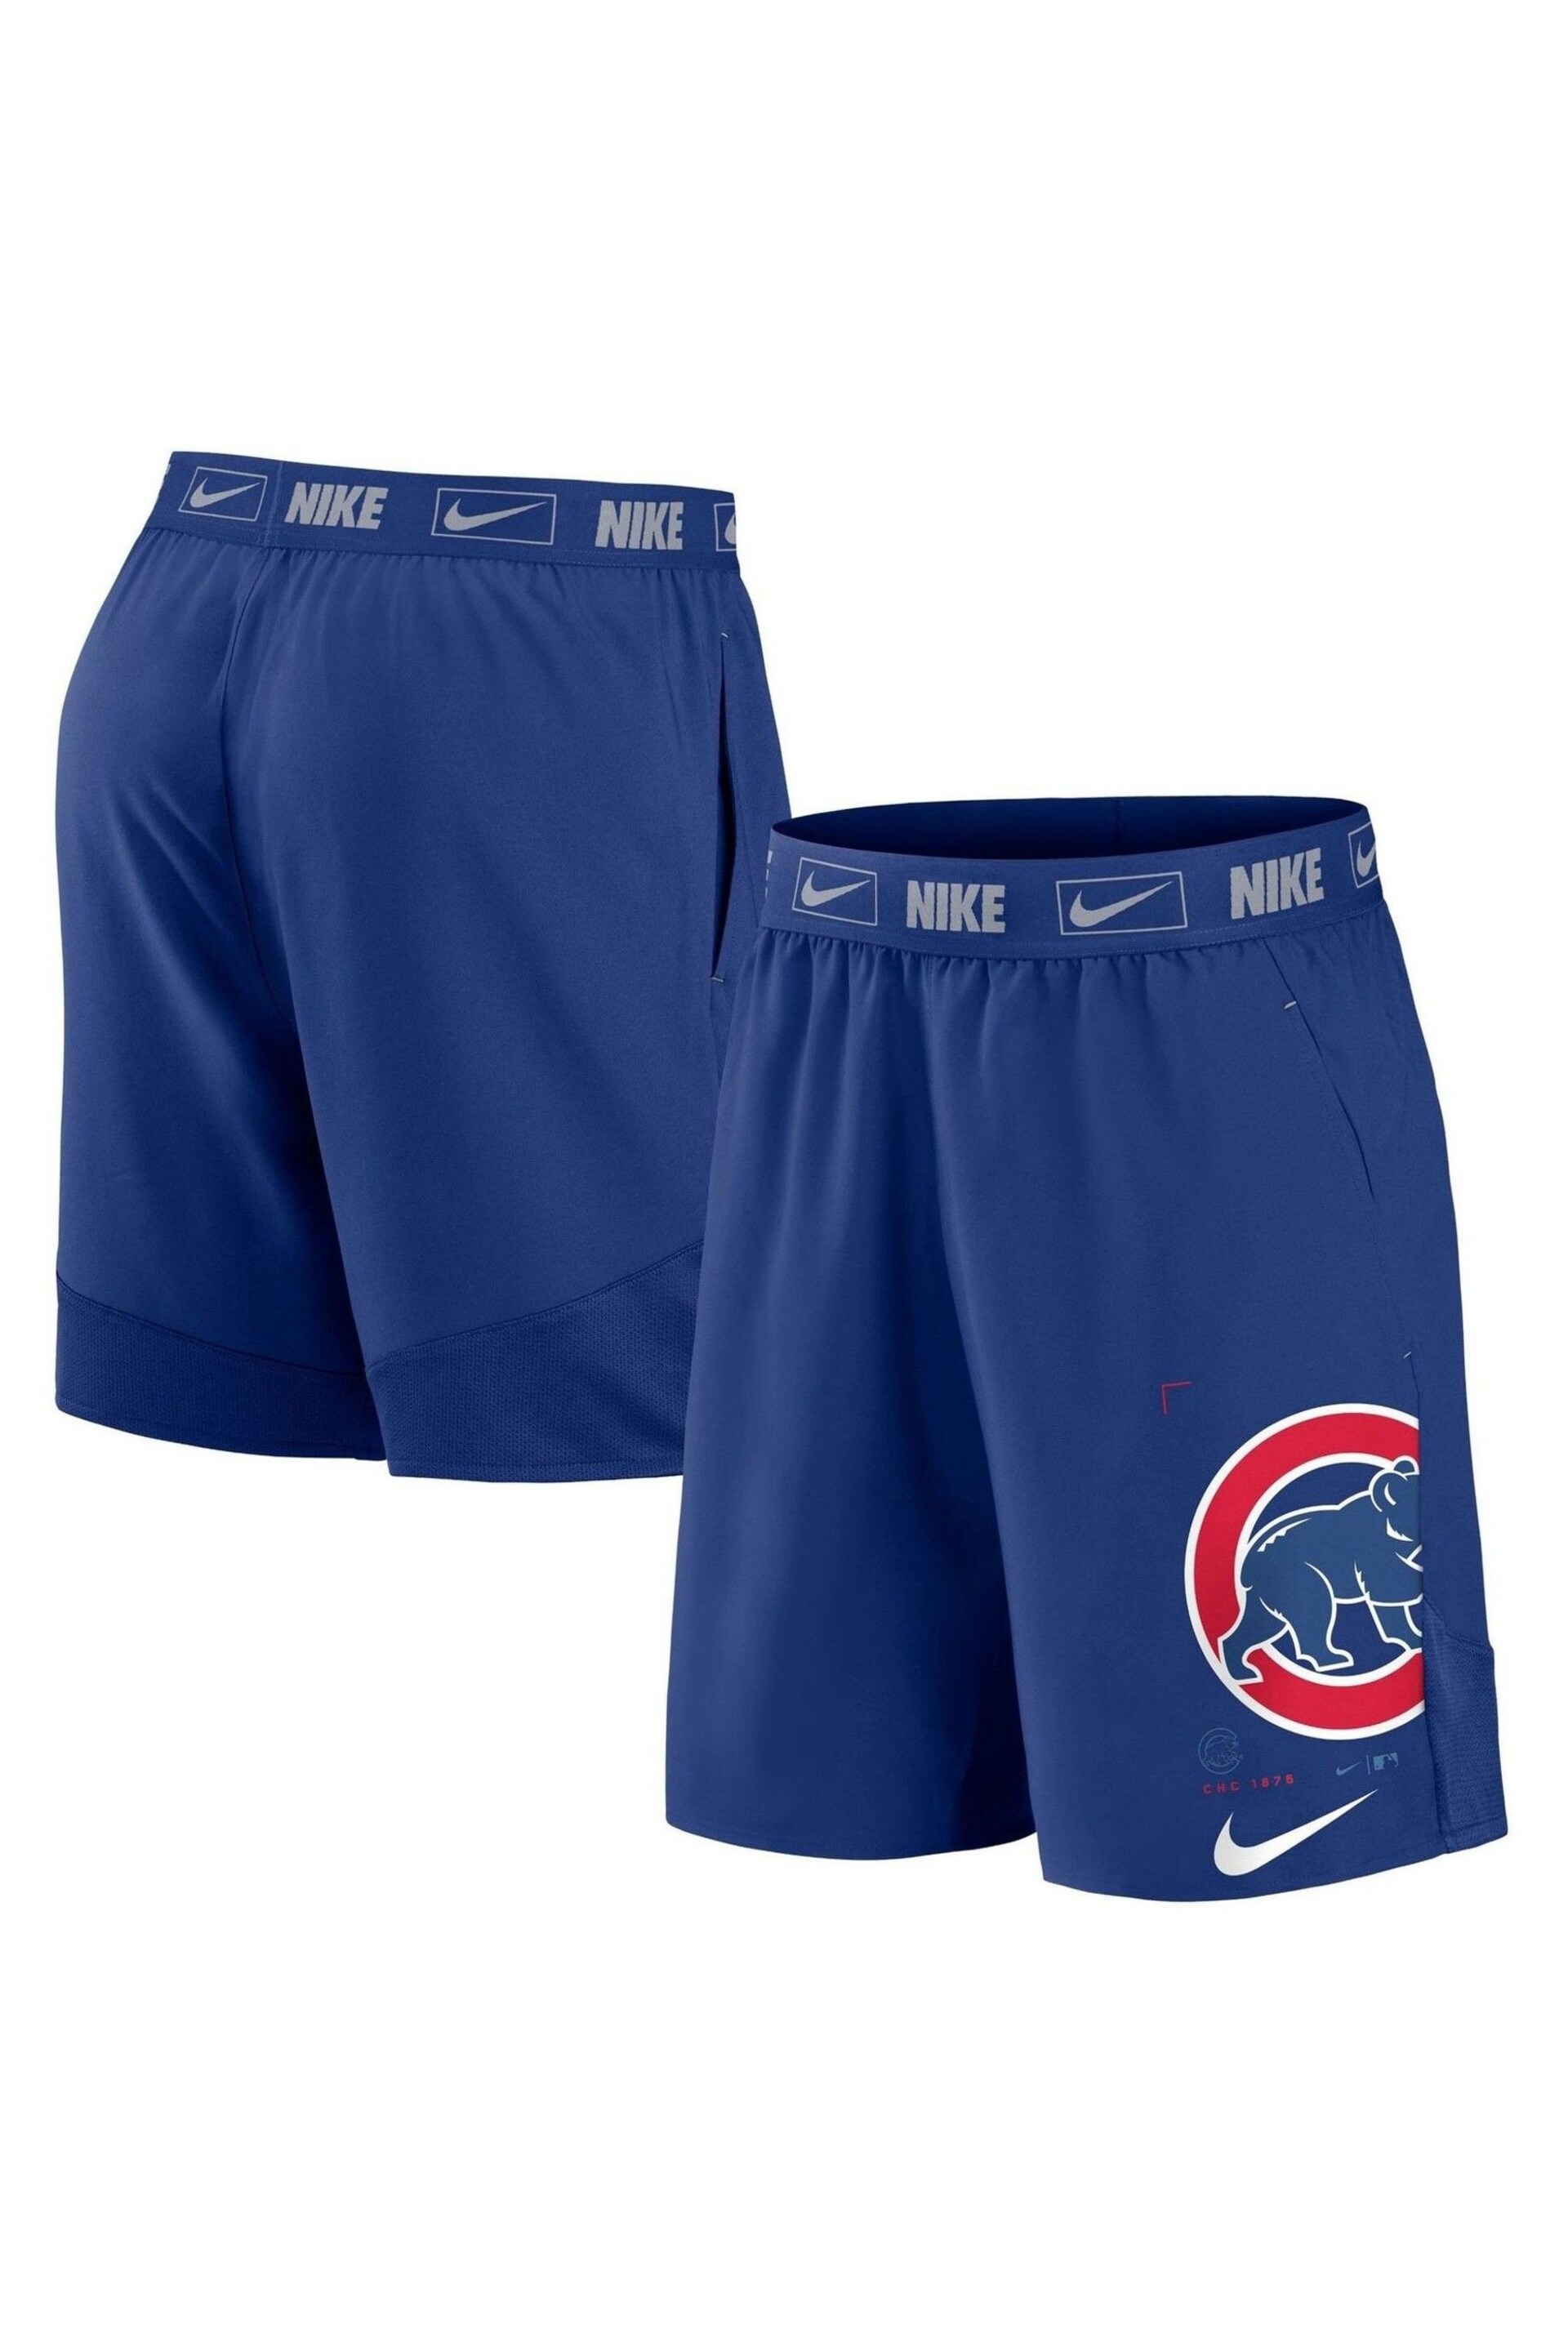 Nike Blue Chicago Cubs Bold Express Woven Shorts - Image 1 of 3